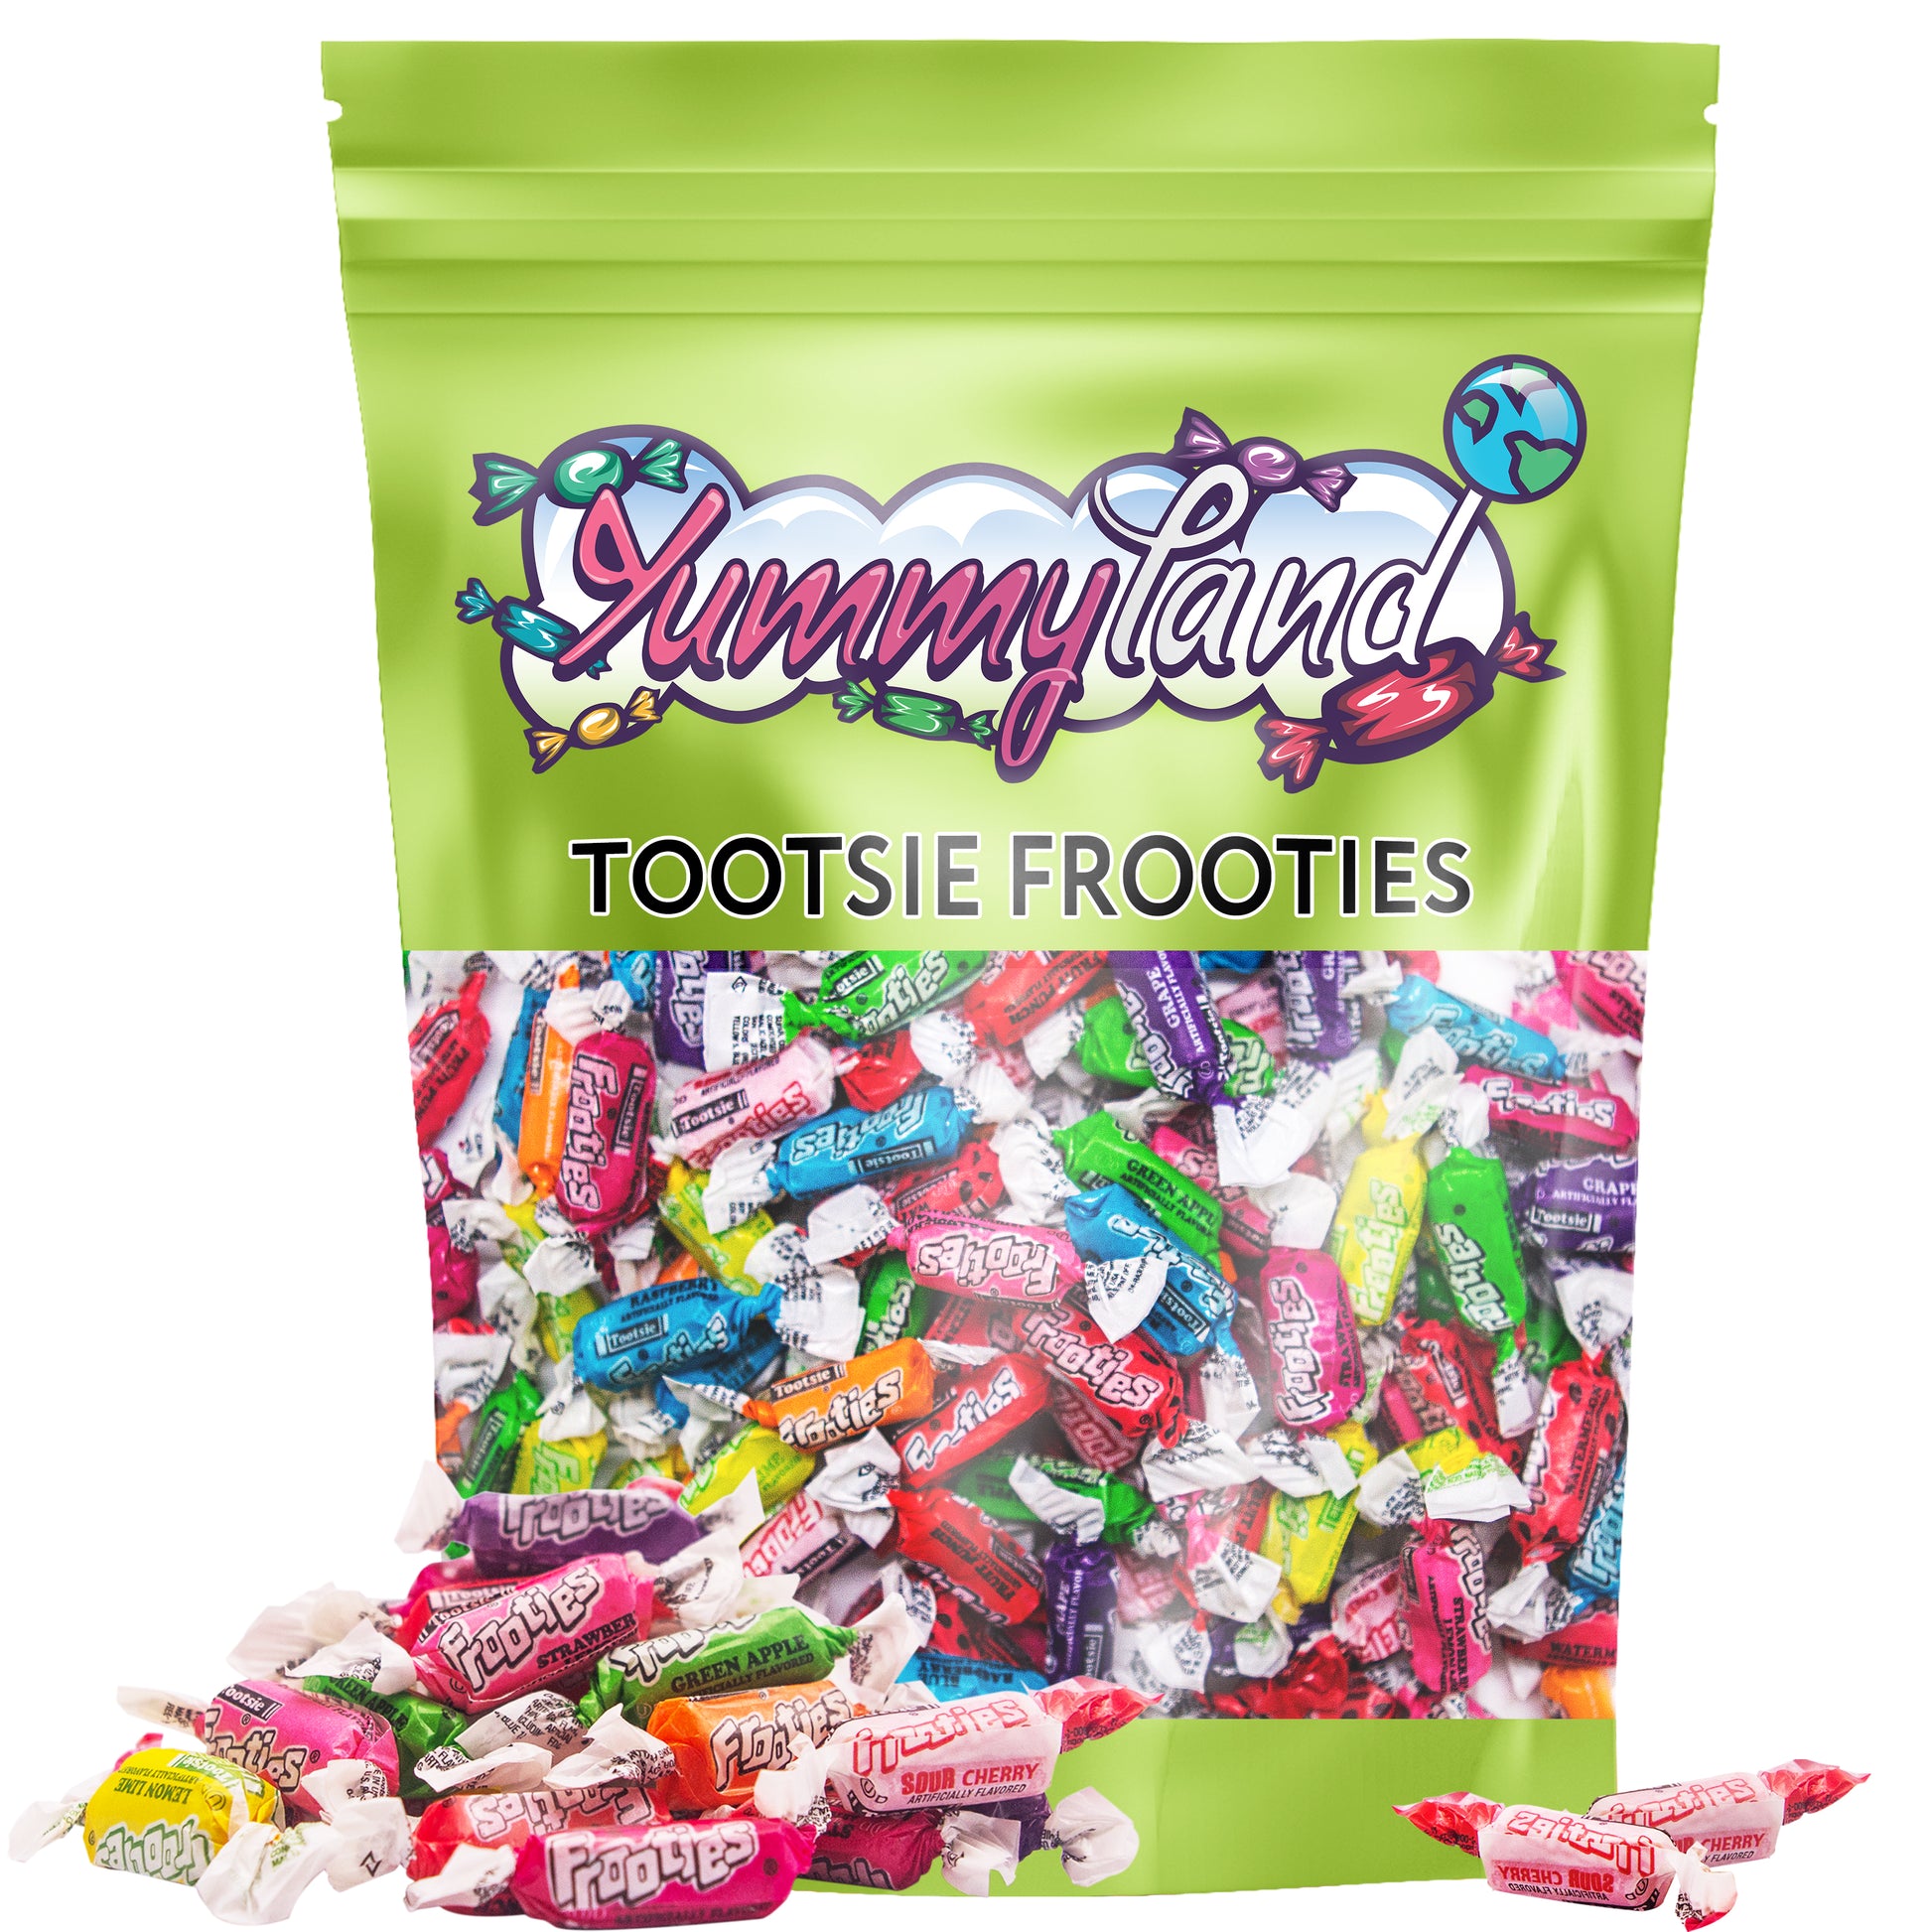 Tootsie Frooties Candy - 10 Assorted Flavors of Tootsie Frooties Fruit Chews Tootsie Roll Flavored Variety Mix of Individually Wrapped Taffies - Glut